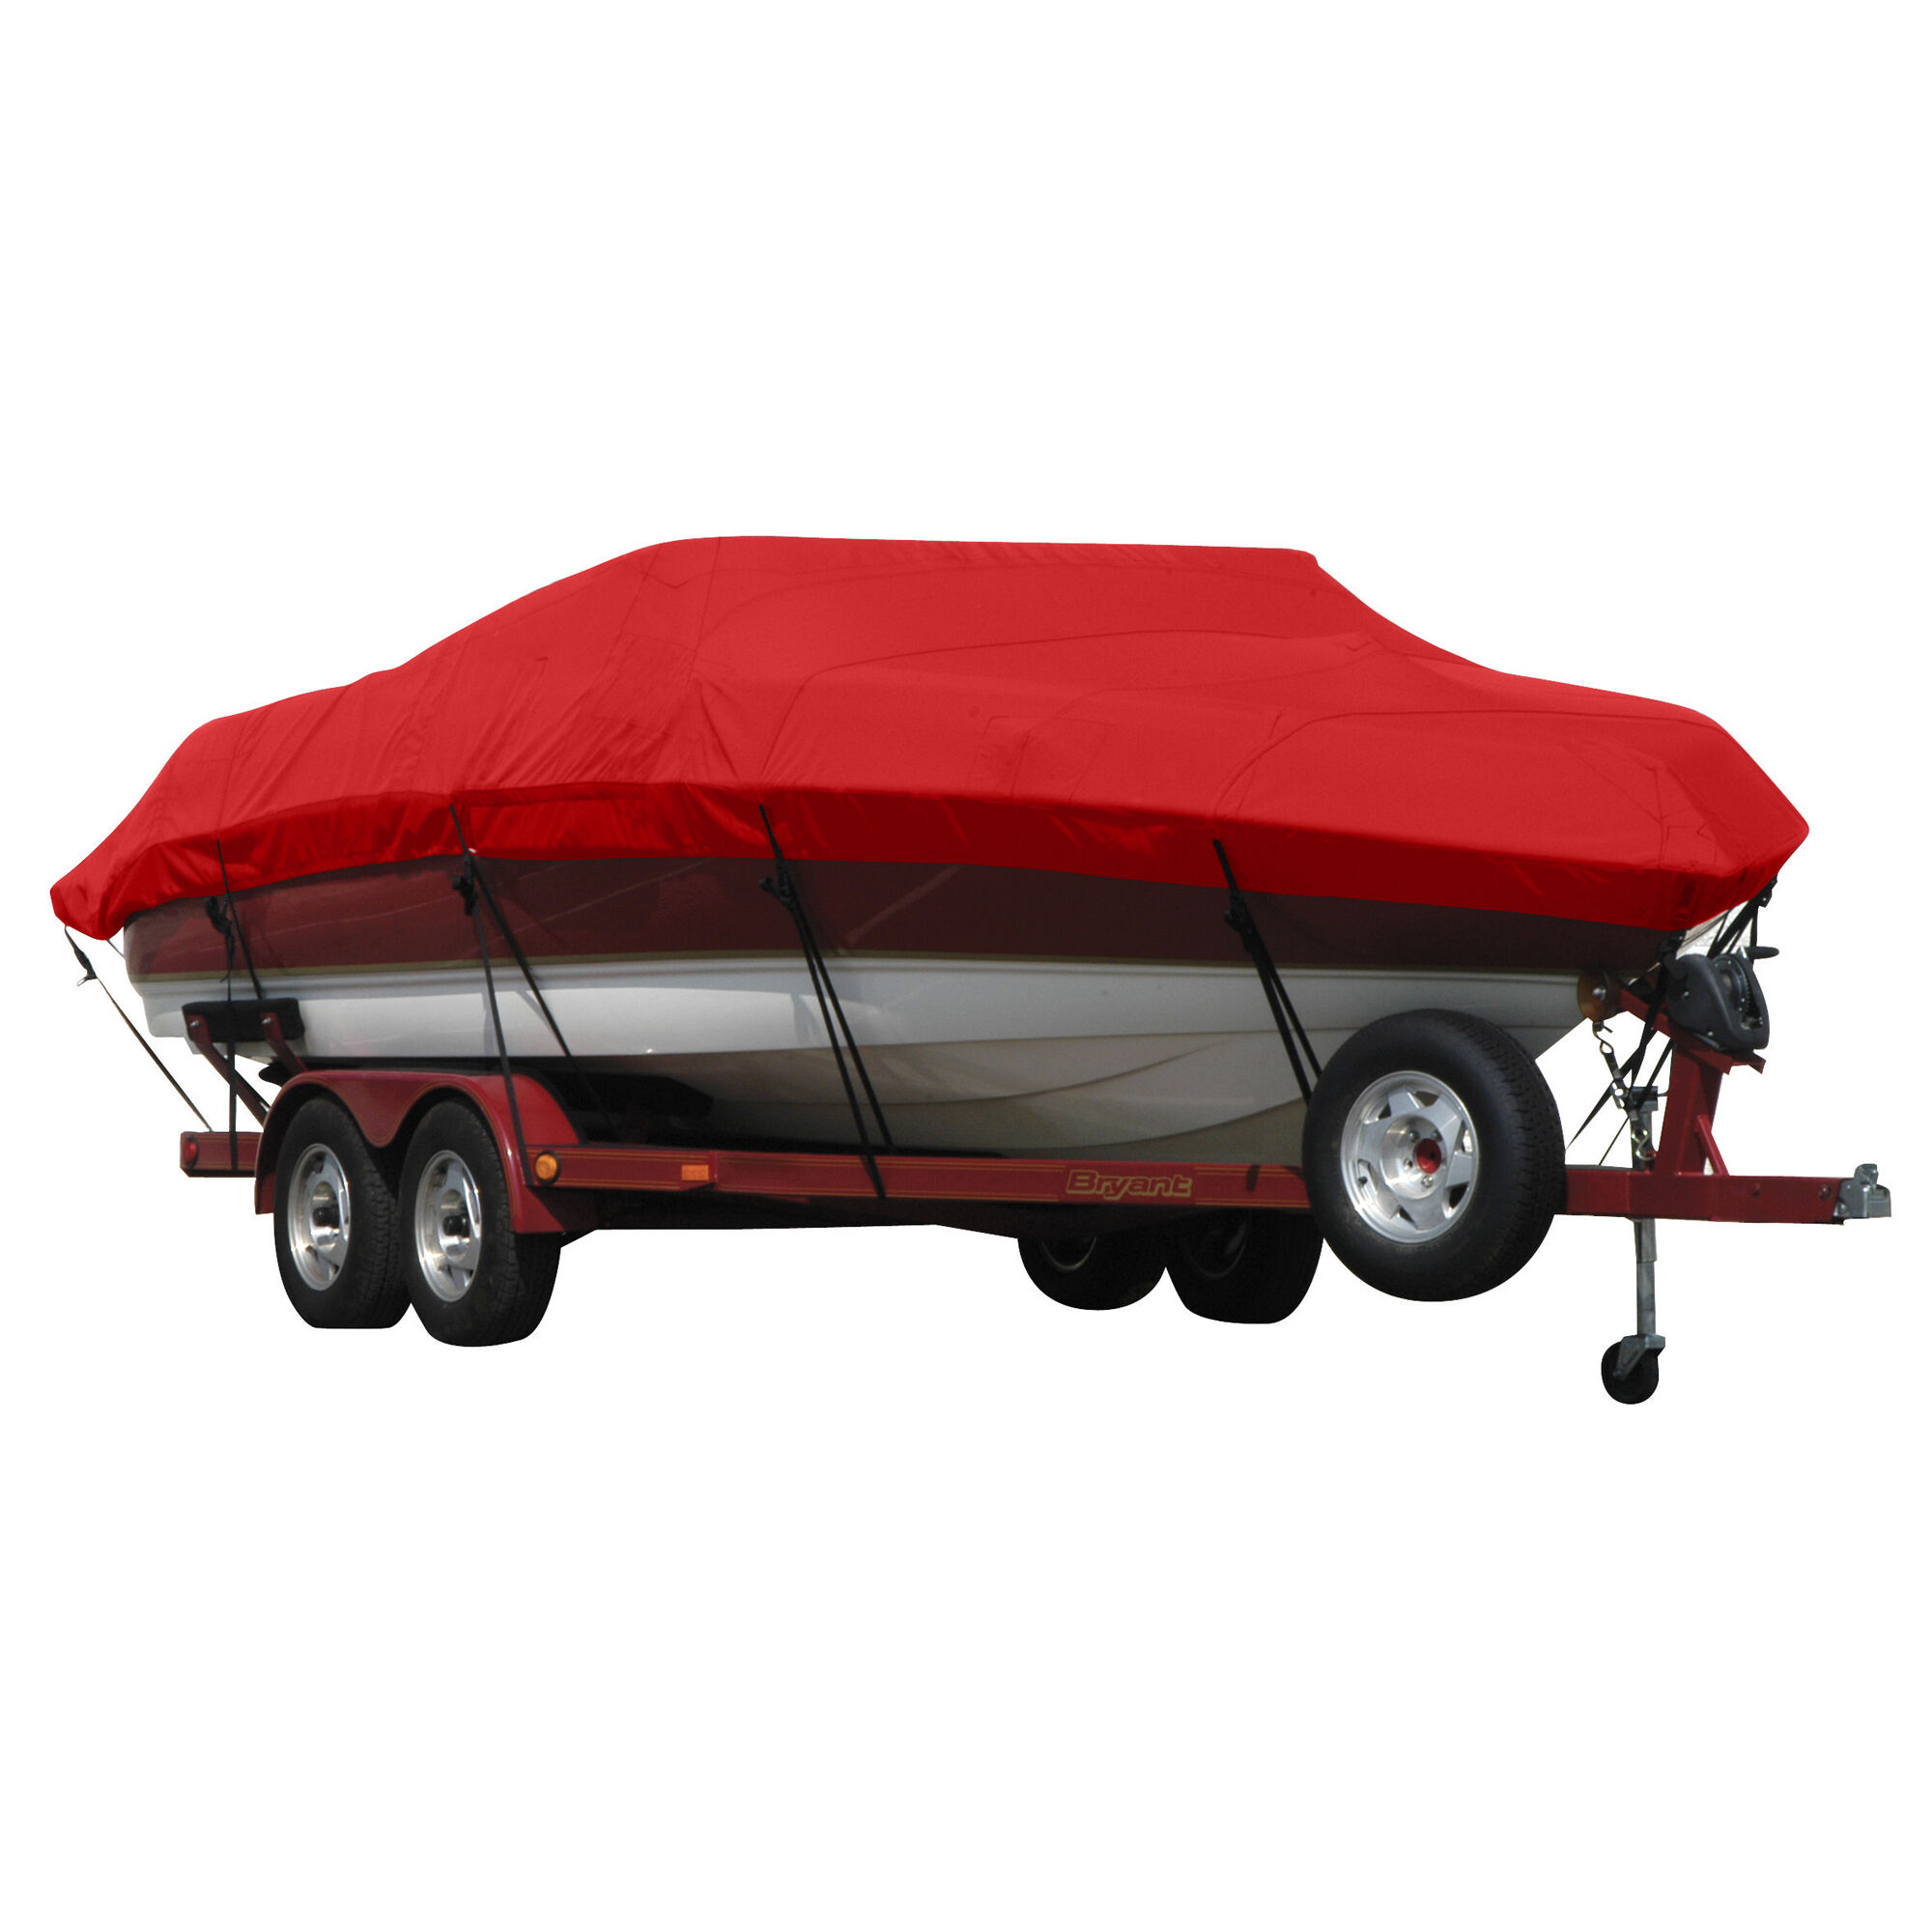 Covermate Exact Fit Sunbrella Boat Cover for Bayliner Ciera 2755 Ss Ciera 2755 Ss With Wing I/O. Jockey Red